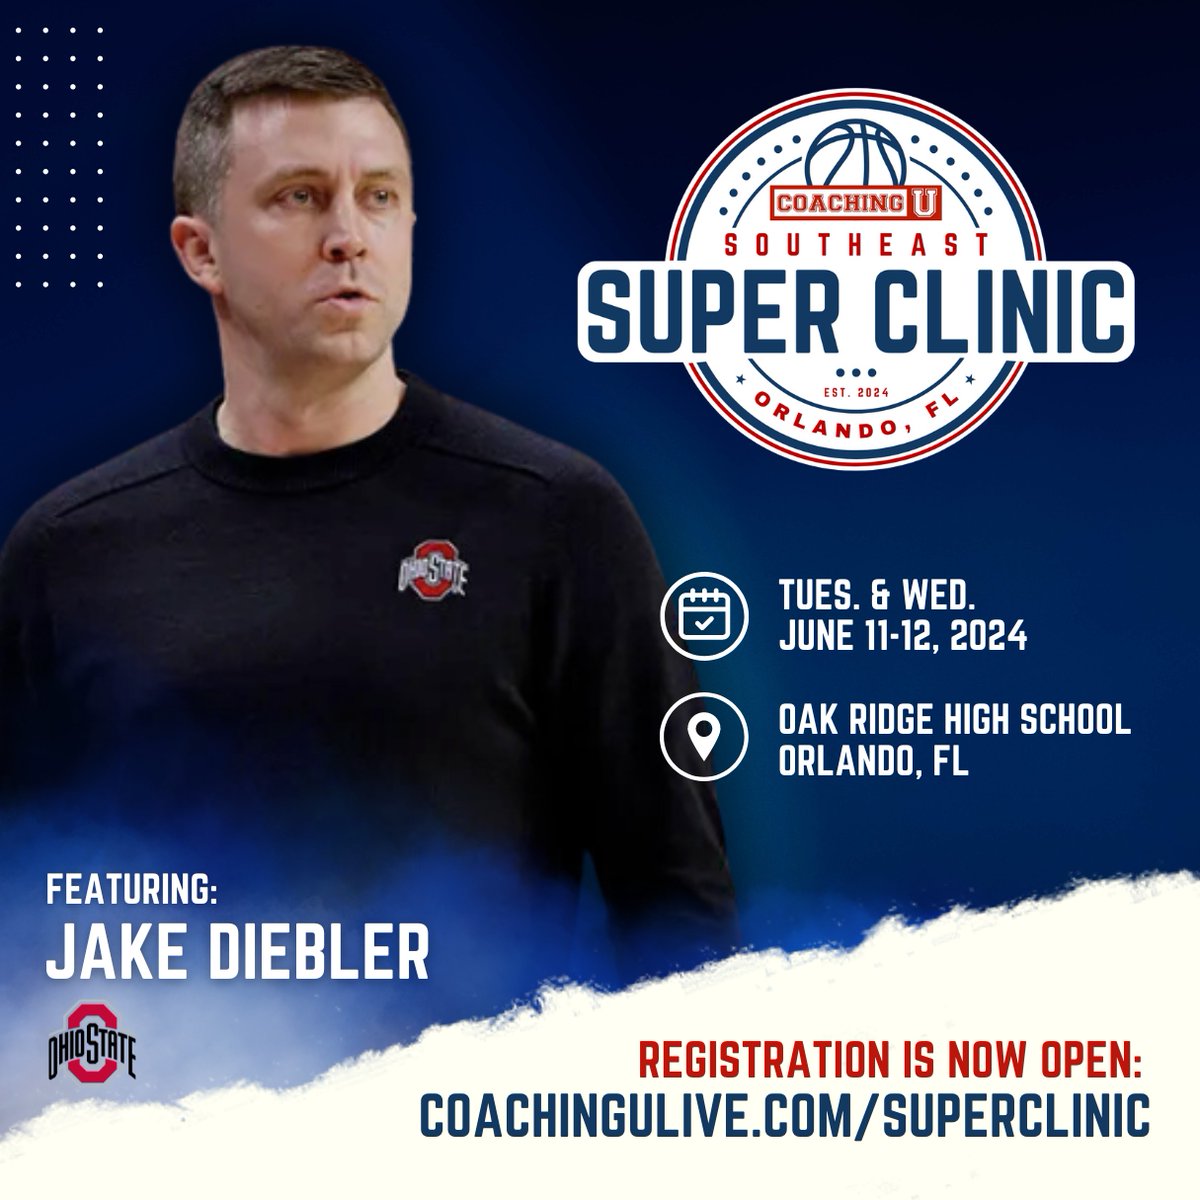 🏀 Coaching U returns to Orlando this summer for the 1st ever Southeast Super Clinic featuring new Ohio State head coach Jake Diebler! 🗓️ June 11-12, 2024 📍 Orlando, FL 🎟️ Registration is now open: 🔗 coachingulive.com/superclinic